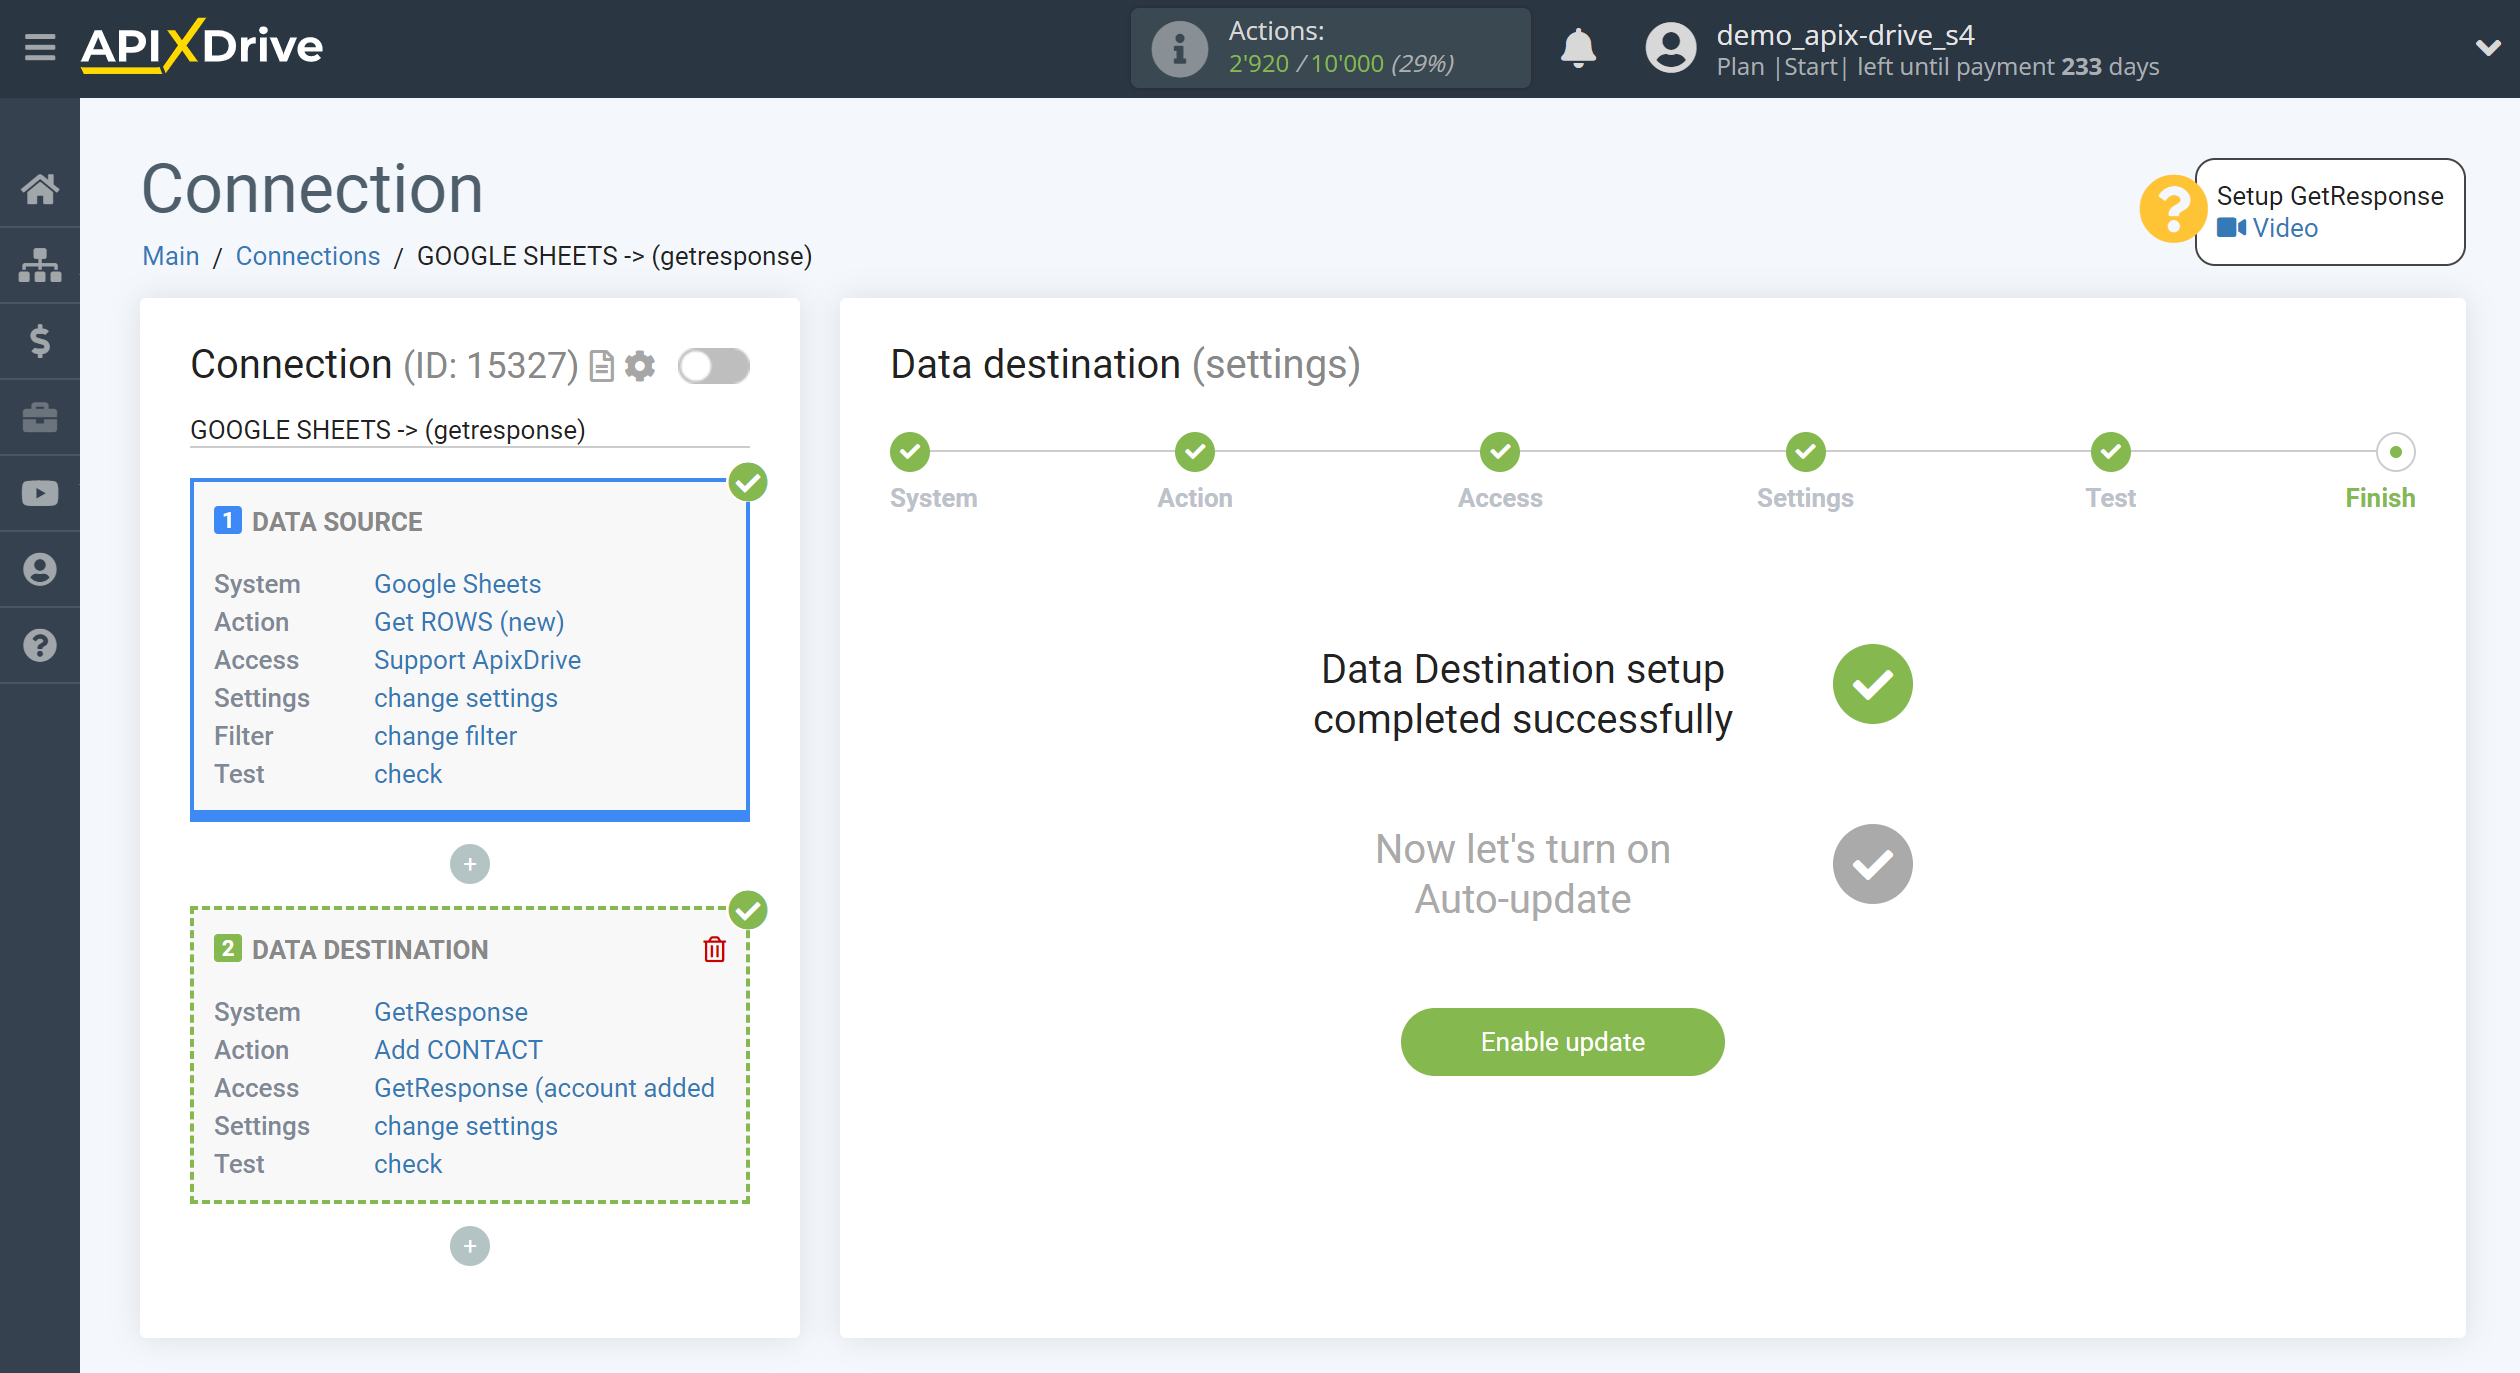 How to Connect GetResponse as Data Destination | Enable auto-update